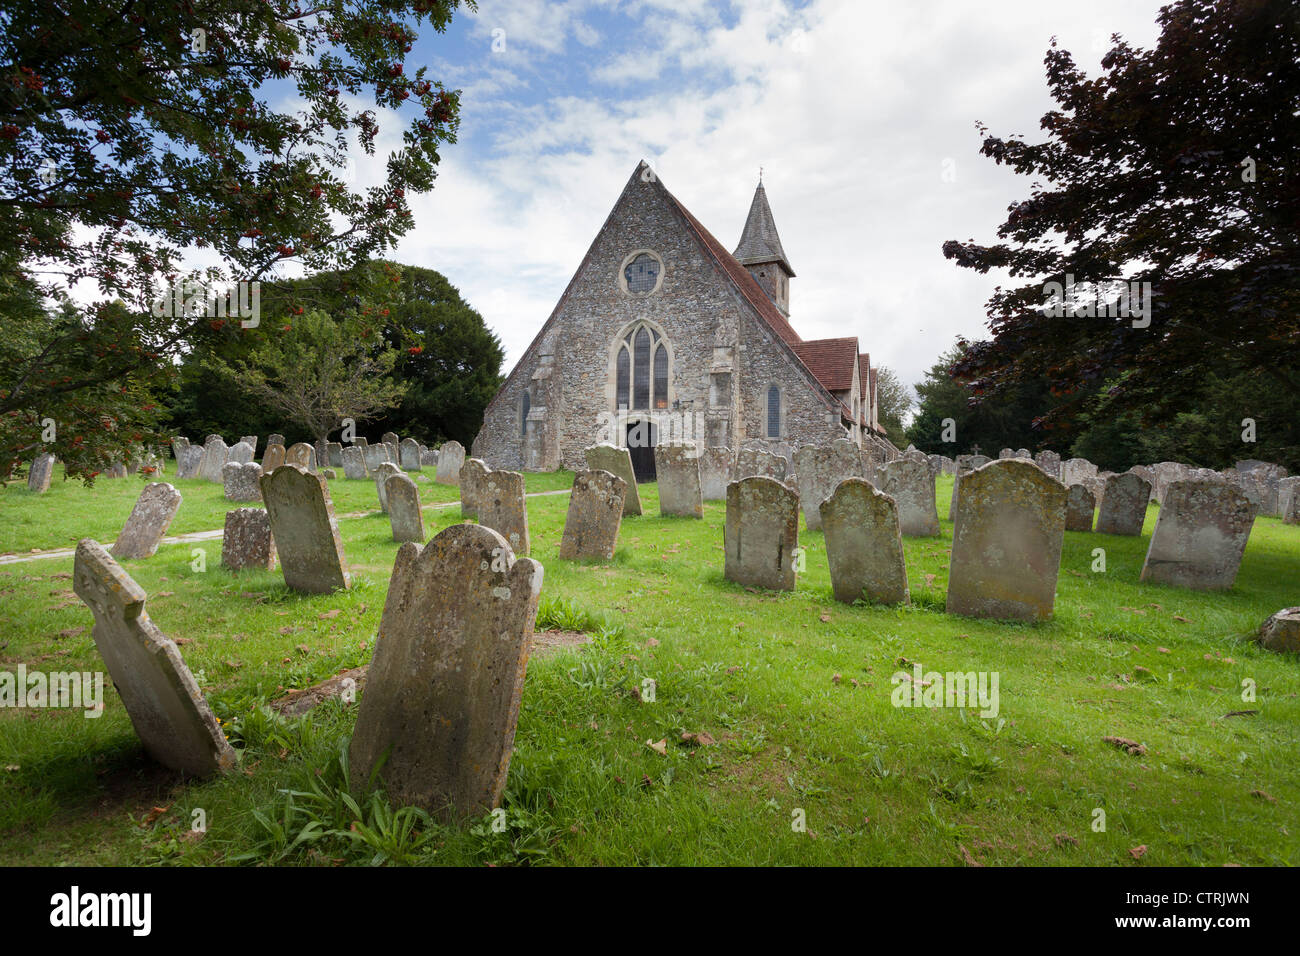 The 12C Church St Thomas à Becket, Warblington and gravestones in the churchyard. Stock Photo